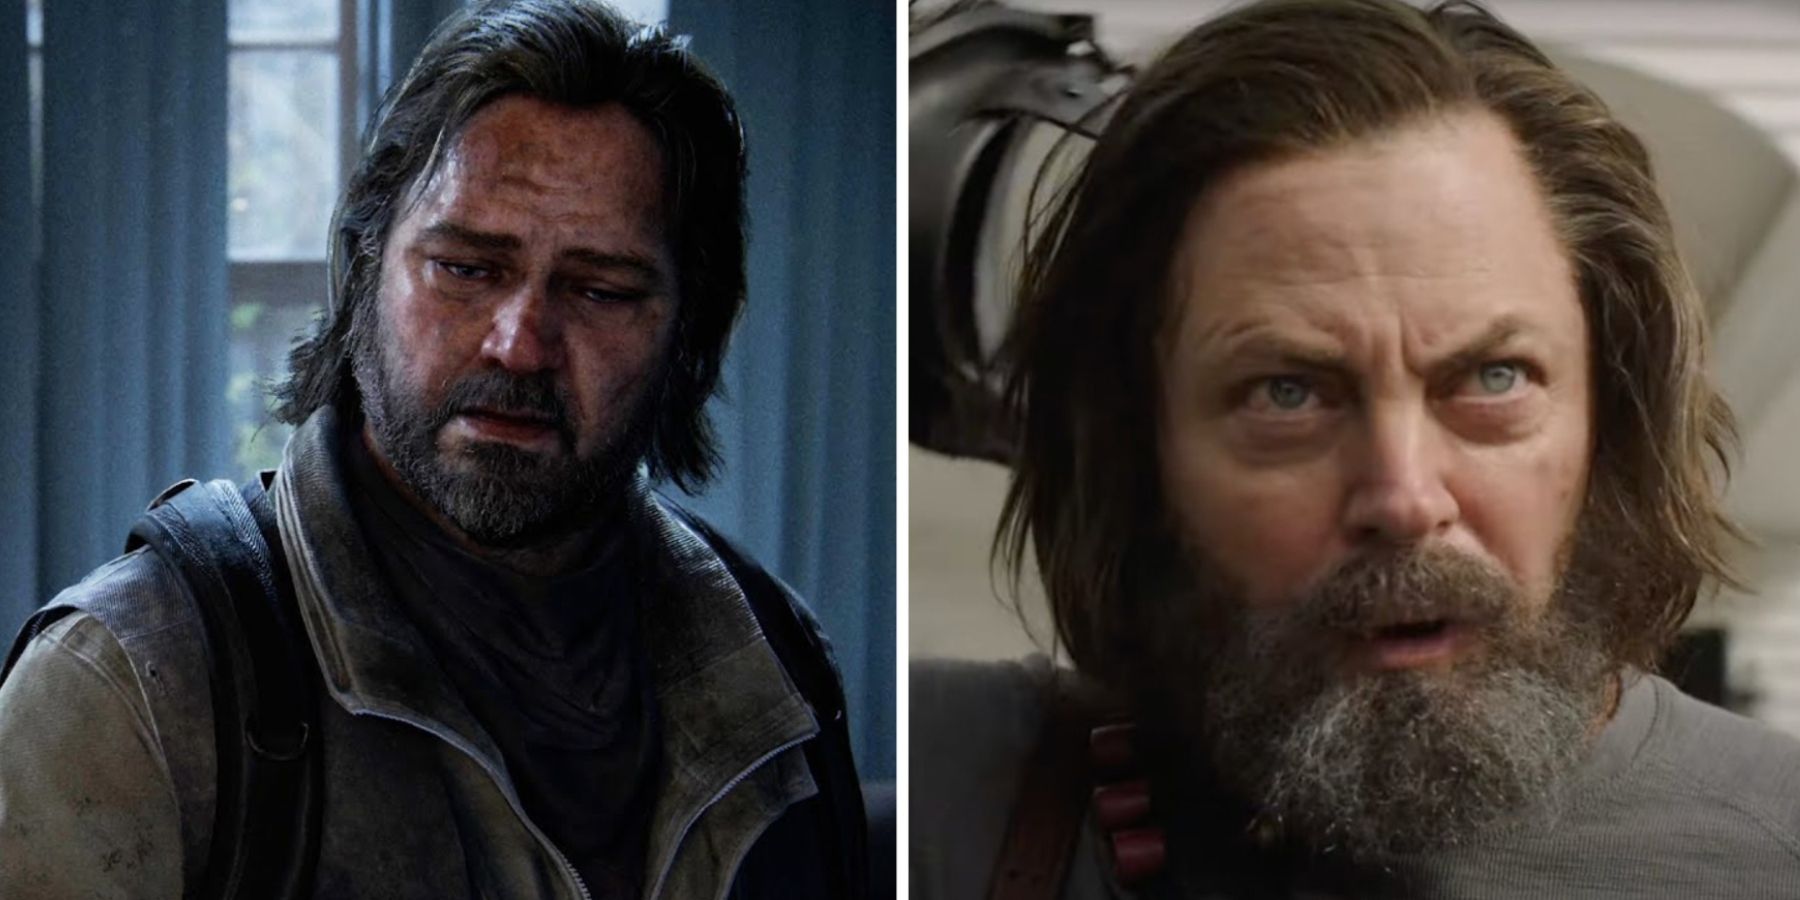 The Last of Us' Episode 3 Ending Explained: Do Bill and Frank Die